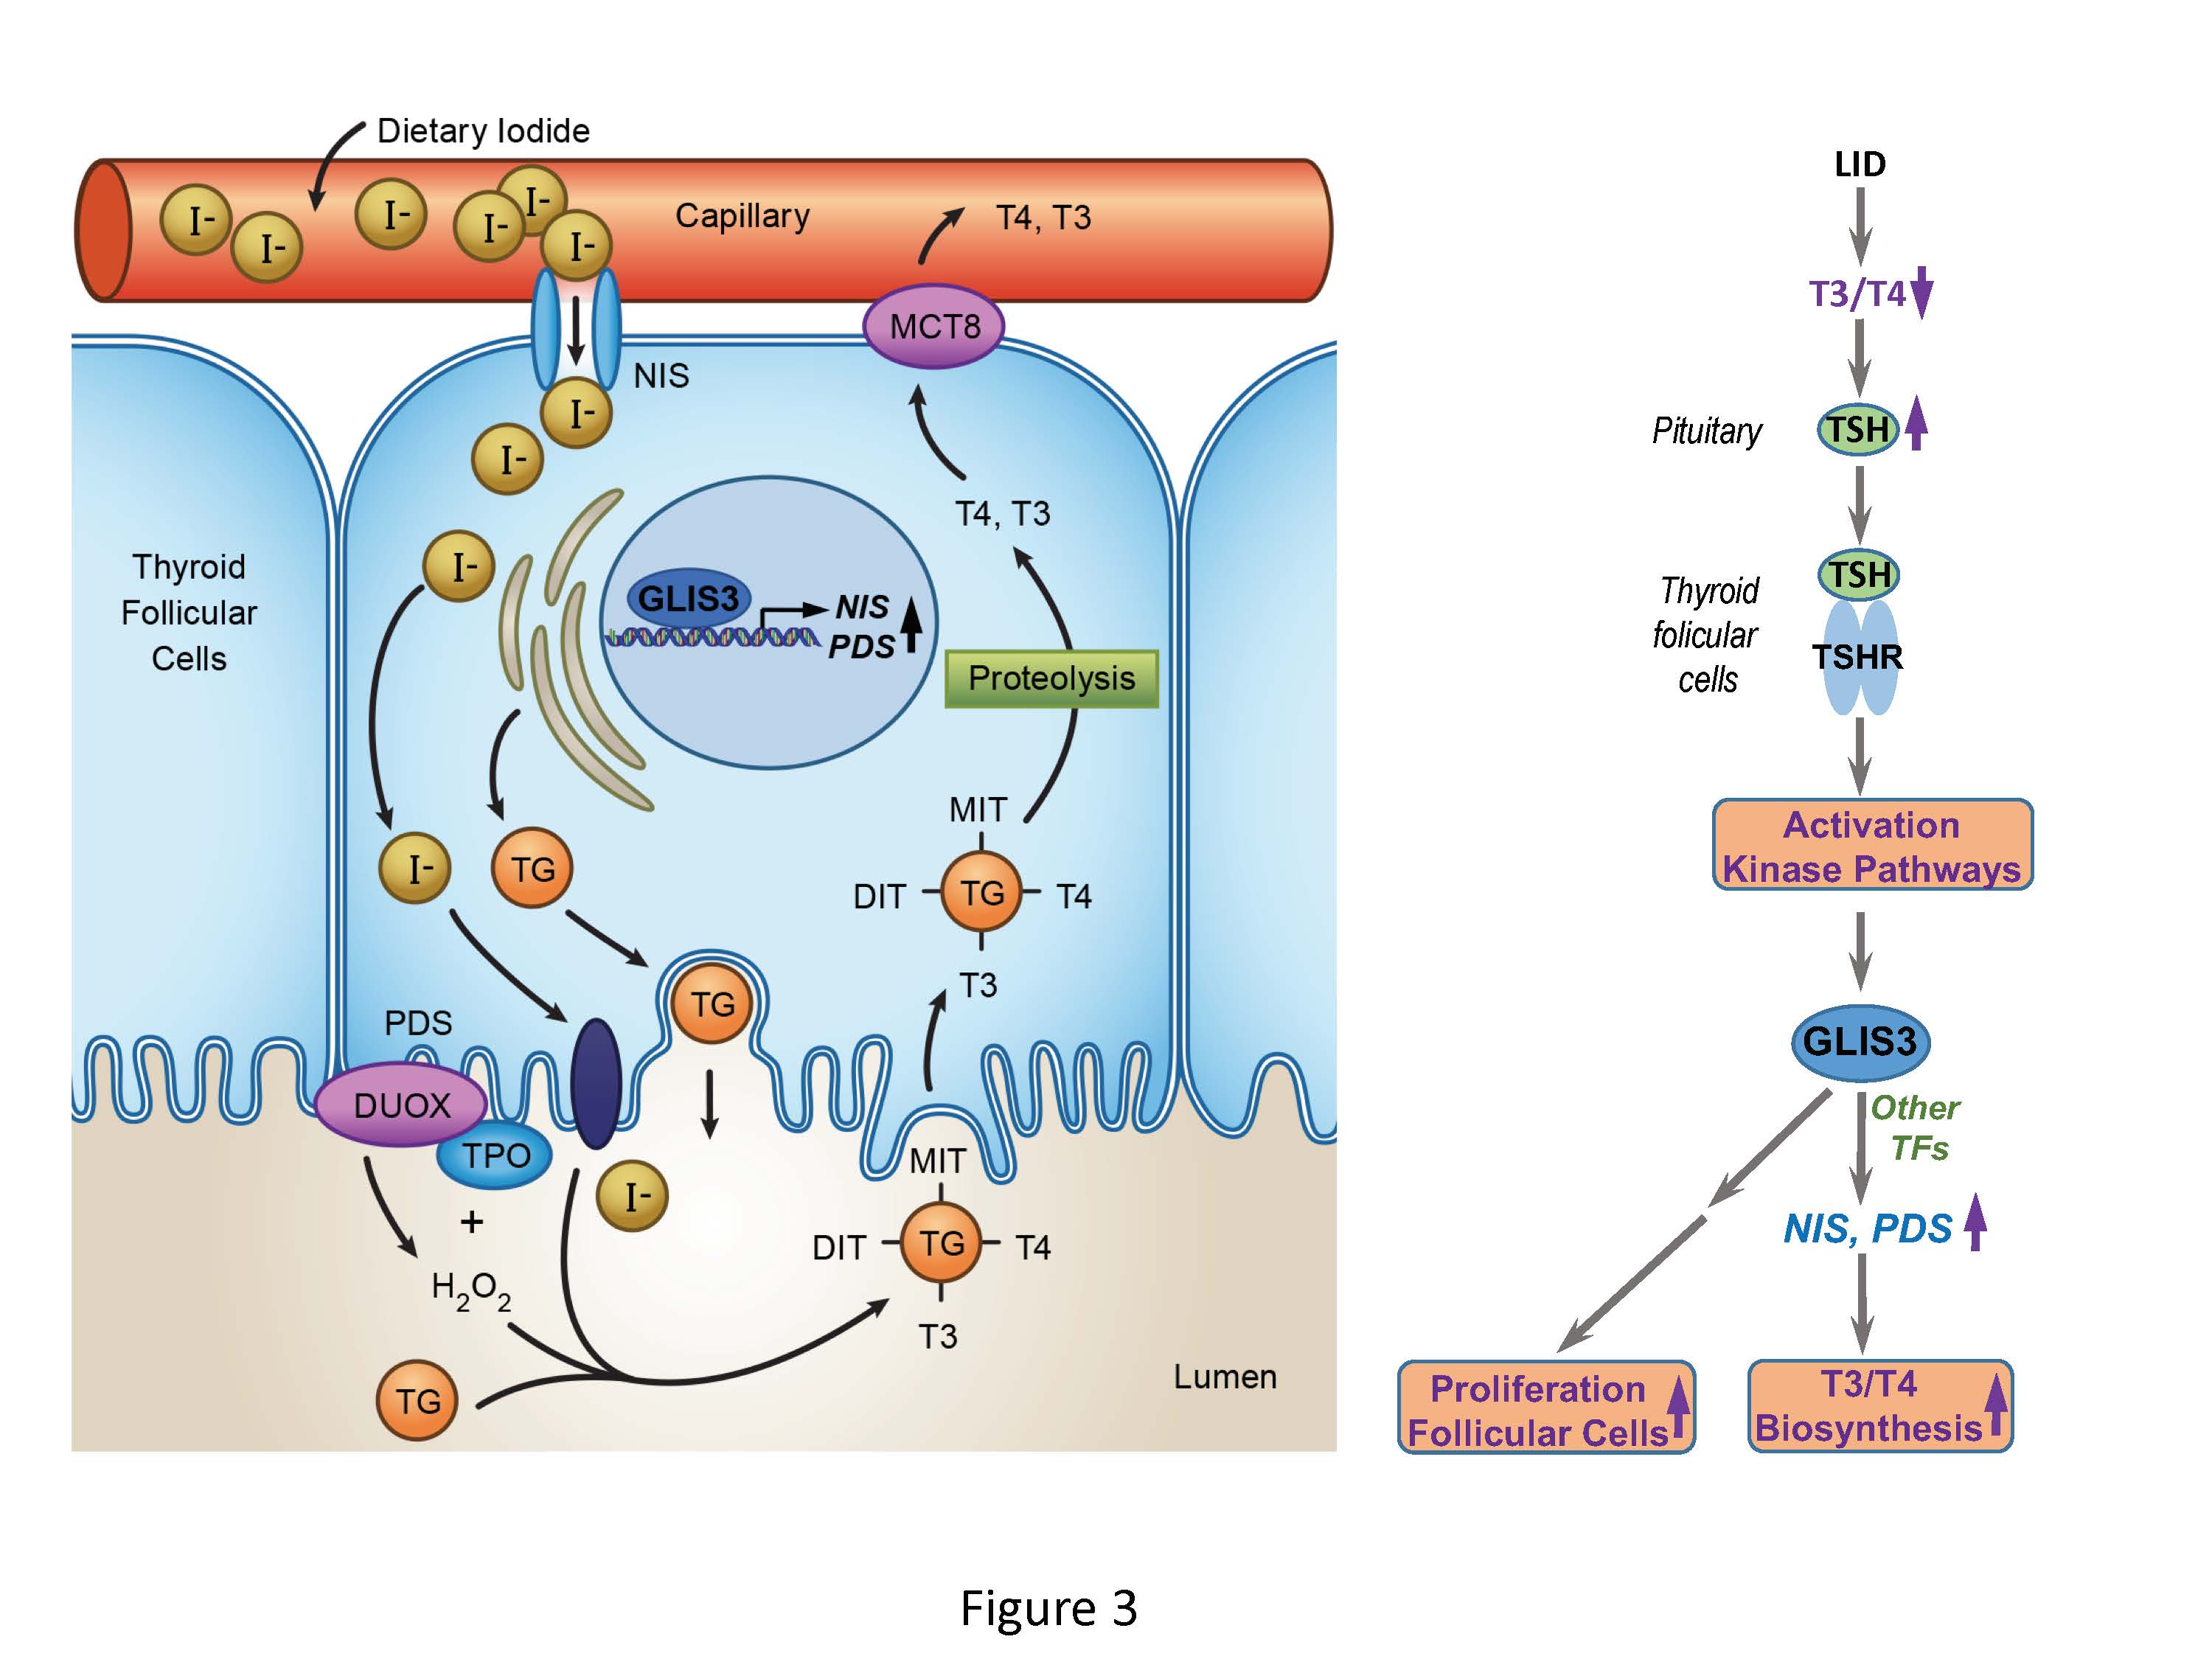 GLIS3 is essential for thyroid hormone biosynthesis.